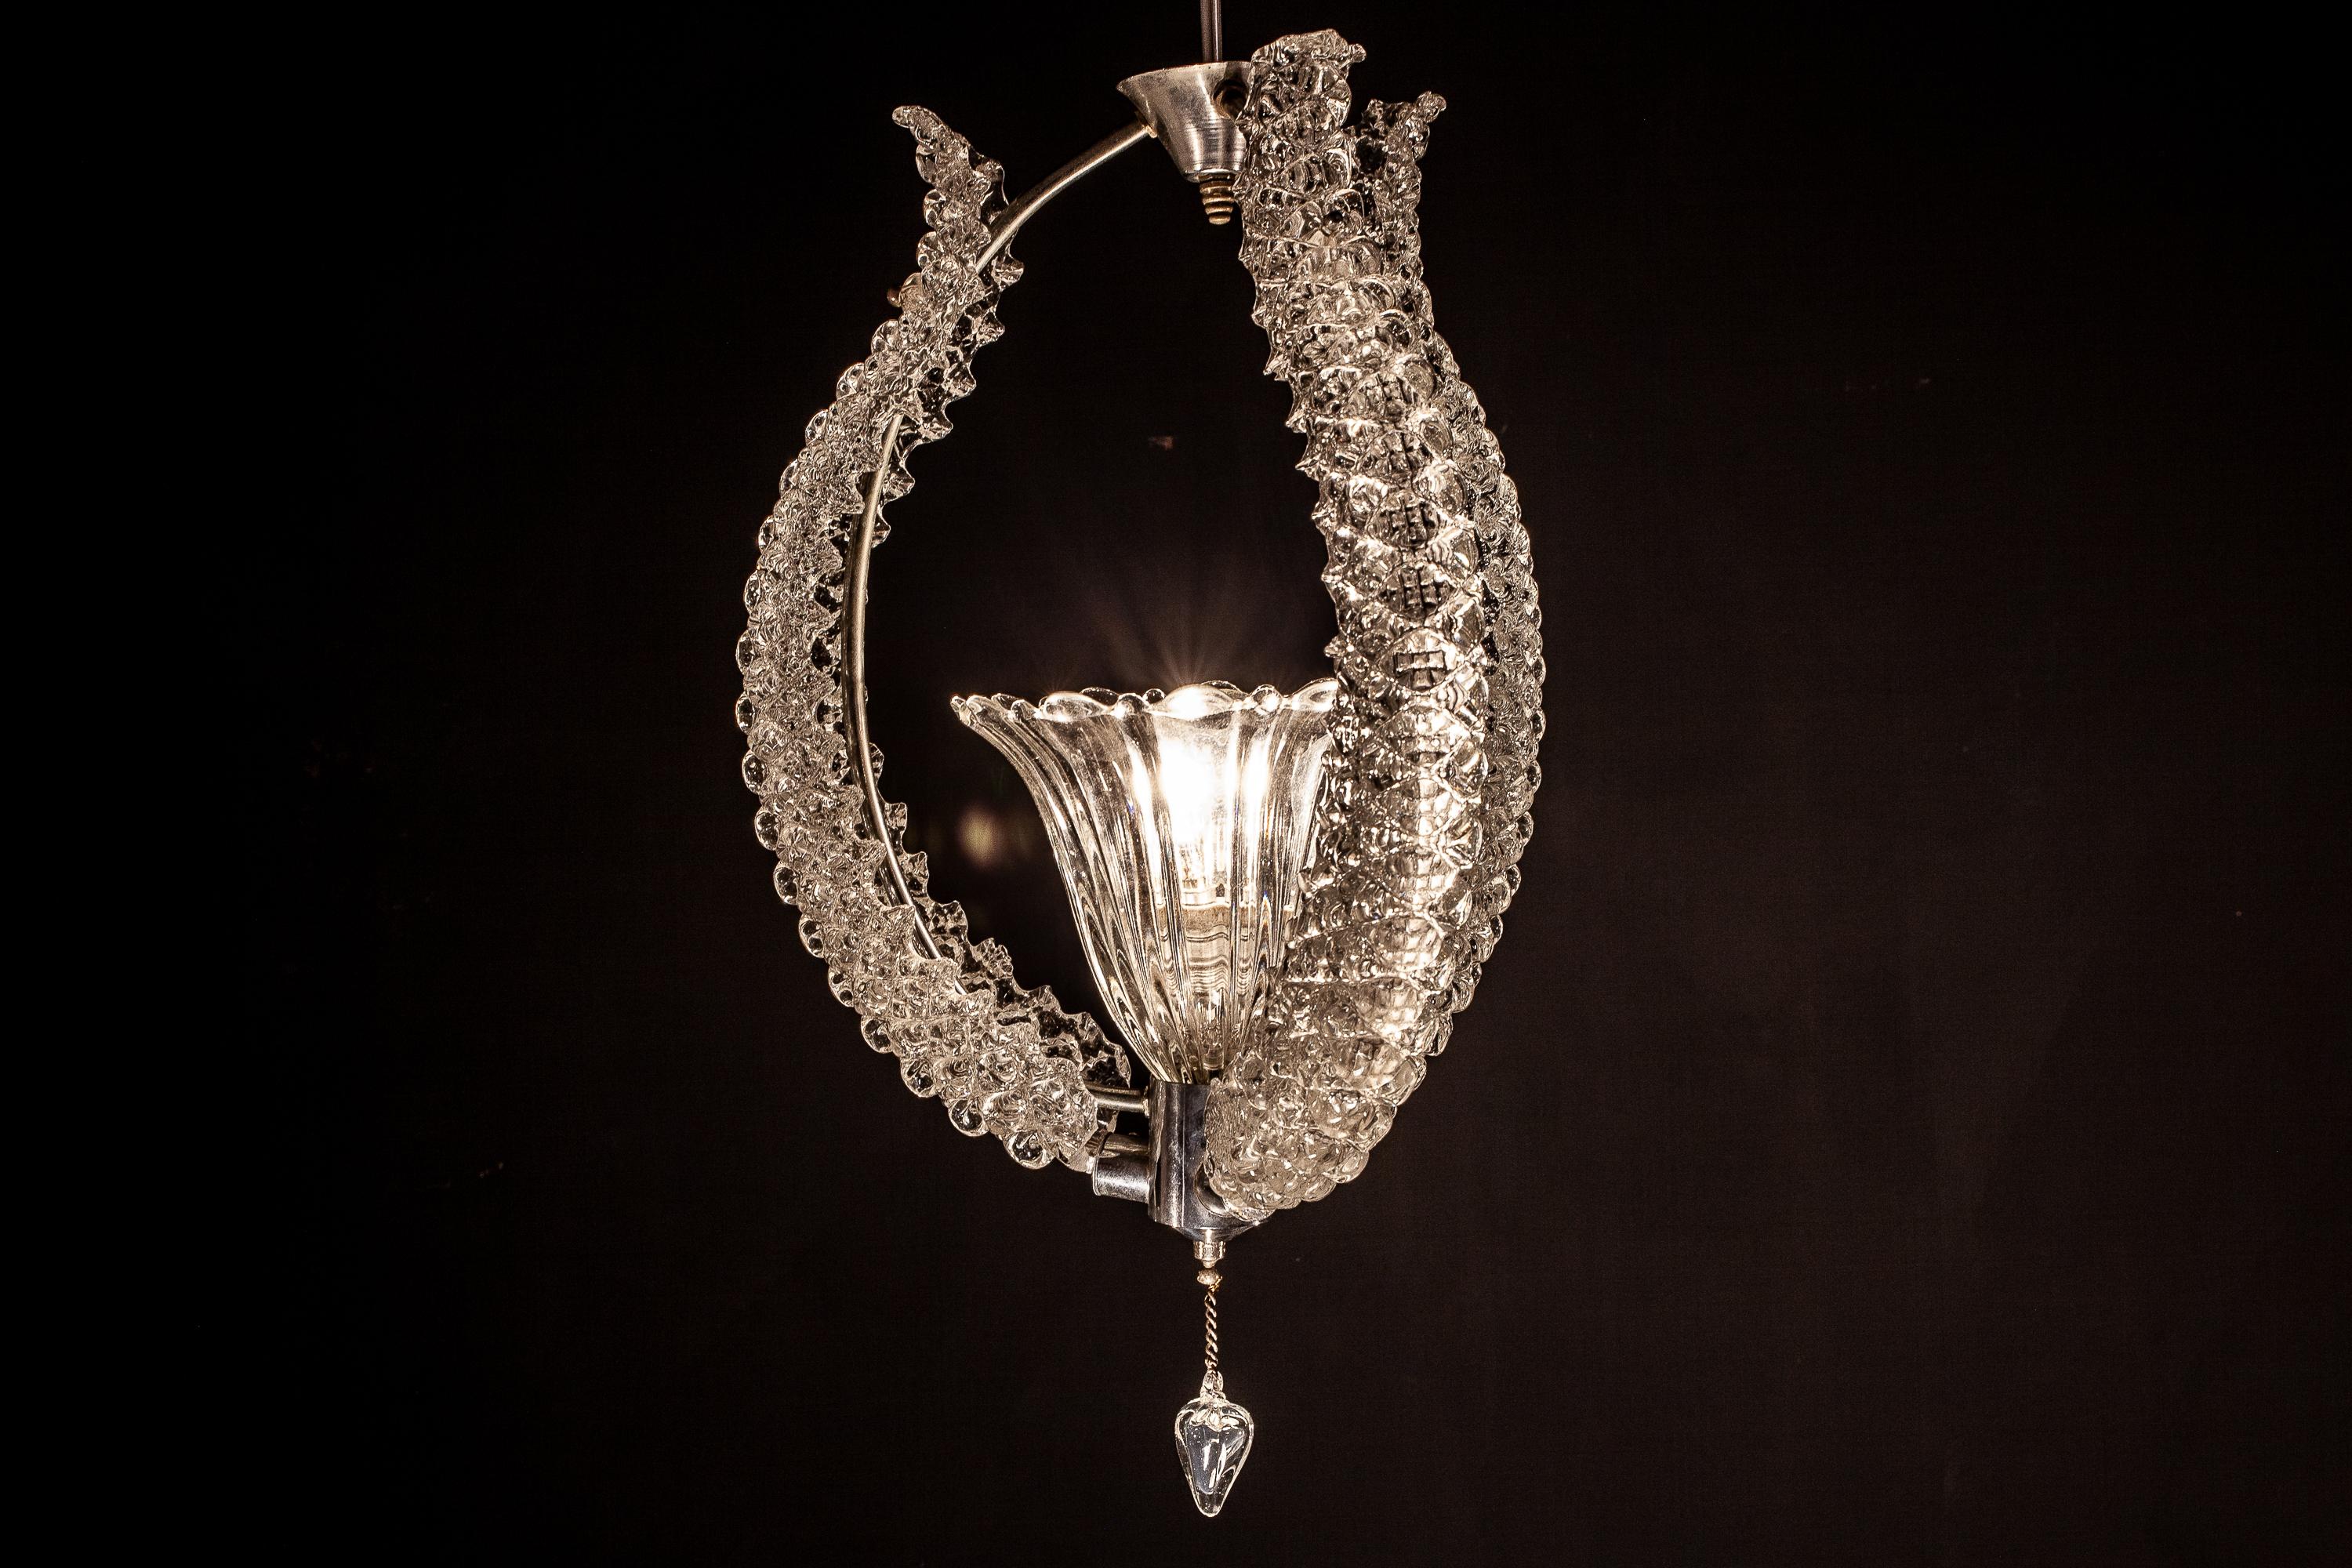 Mid-20th Century Midcentury Murano Glass Elegant Chandelier by Ercole Barovier, 1940s For Sale